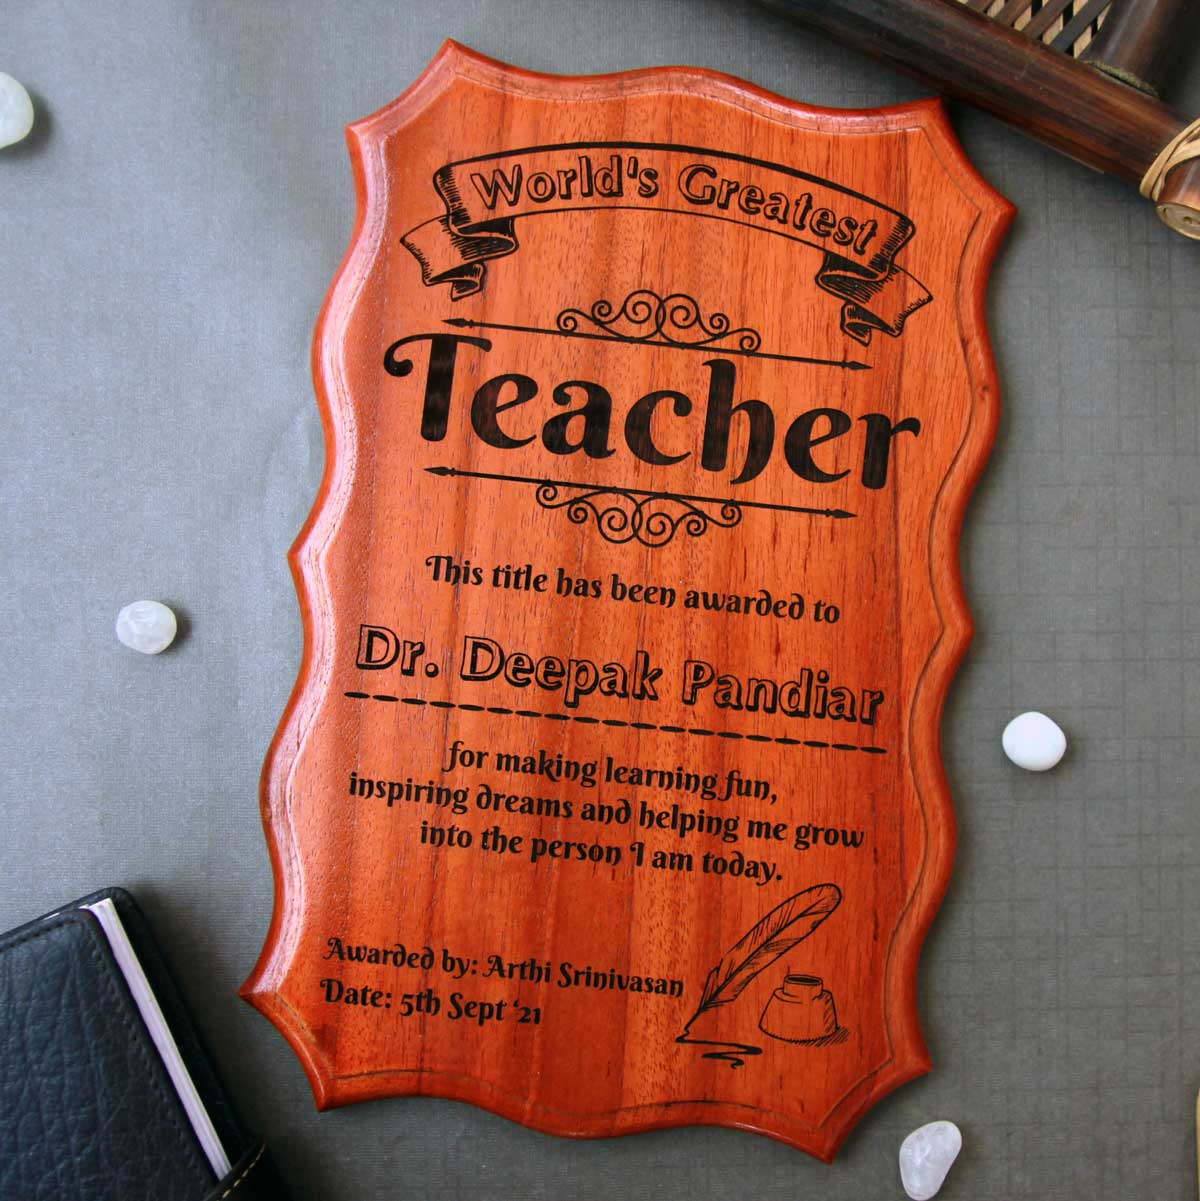 Top 10 Teacher Gifts - Small Shops - The Super Mom Life